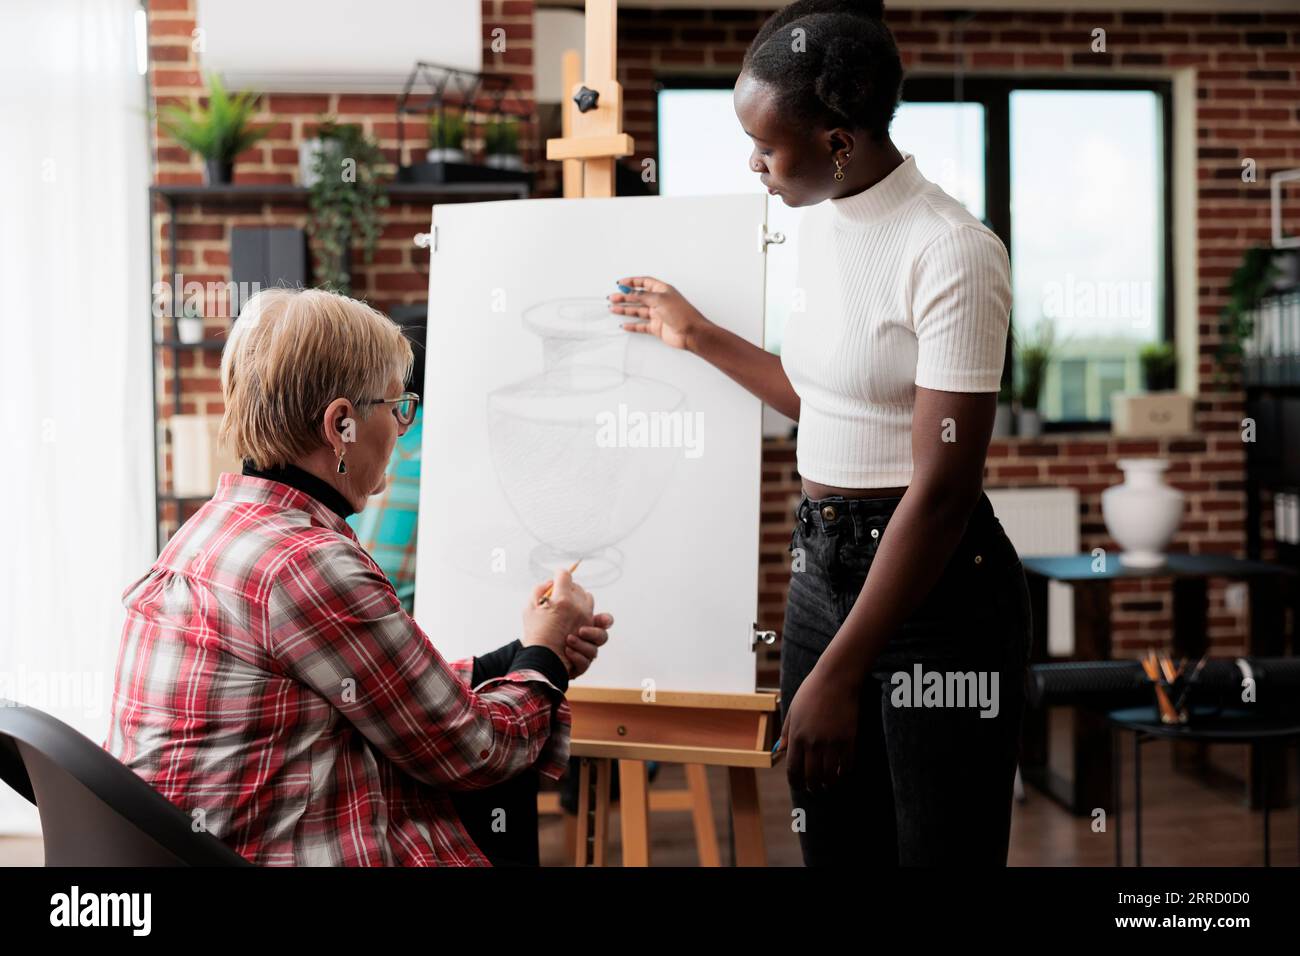 Senior woman engaging in social activities, taking drawing lesson. African American young woman art instructor teaching older adults to draw in community center standing near easel assisting student Stock Photo